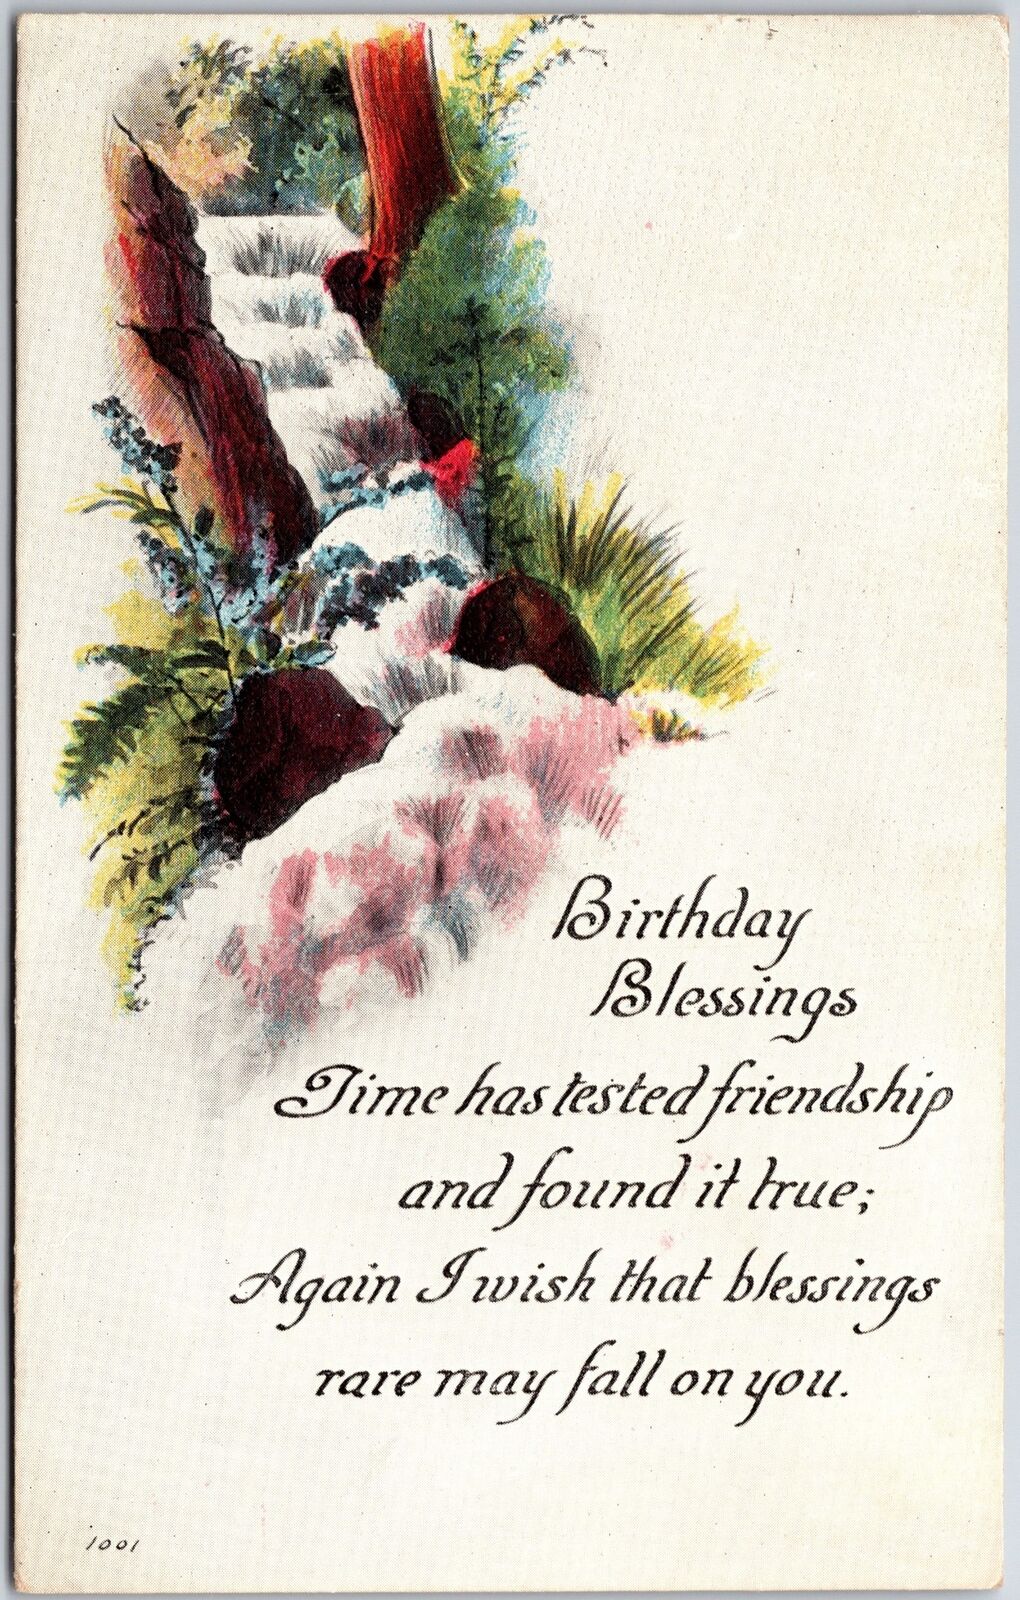 1906 Birthday Blessings Friendship Wishes And Greetings Card, Vintage Postcard